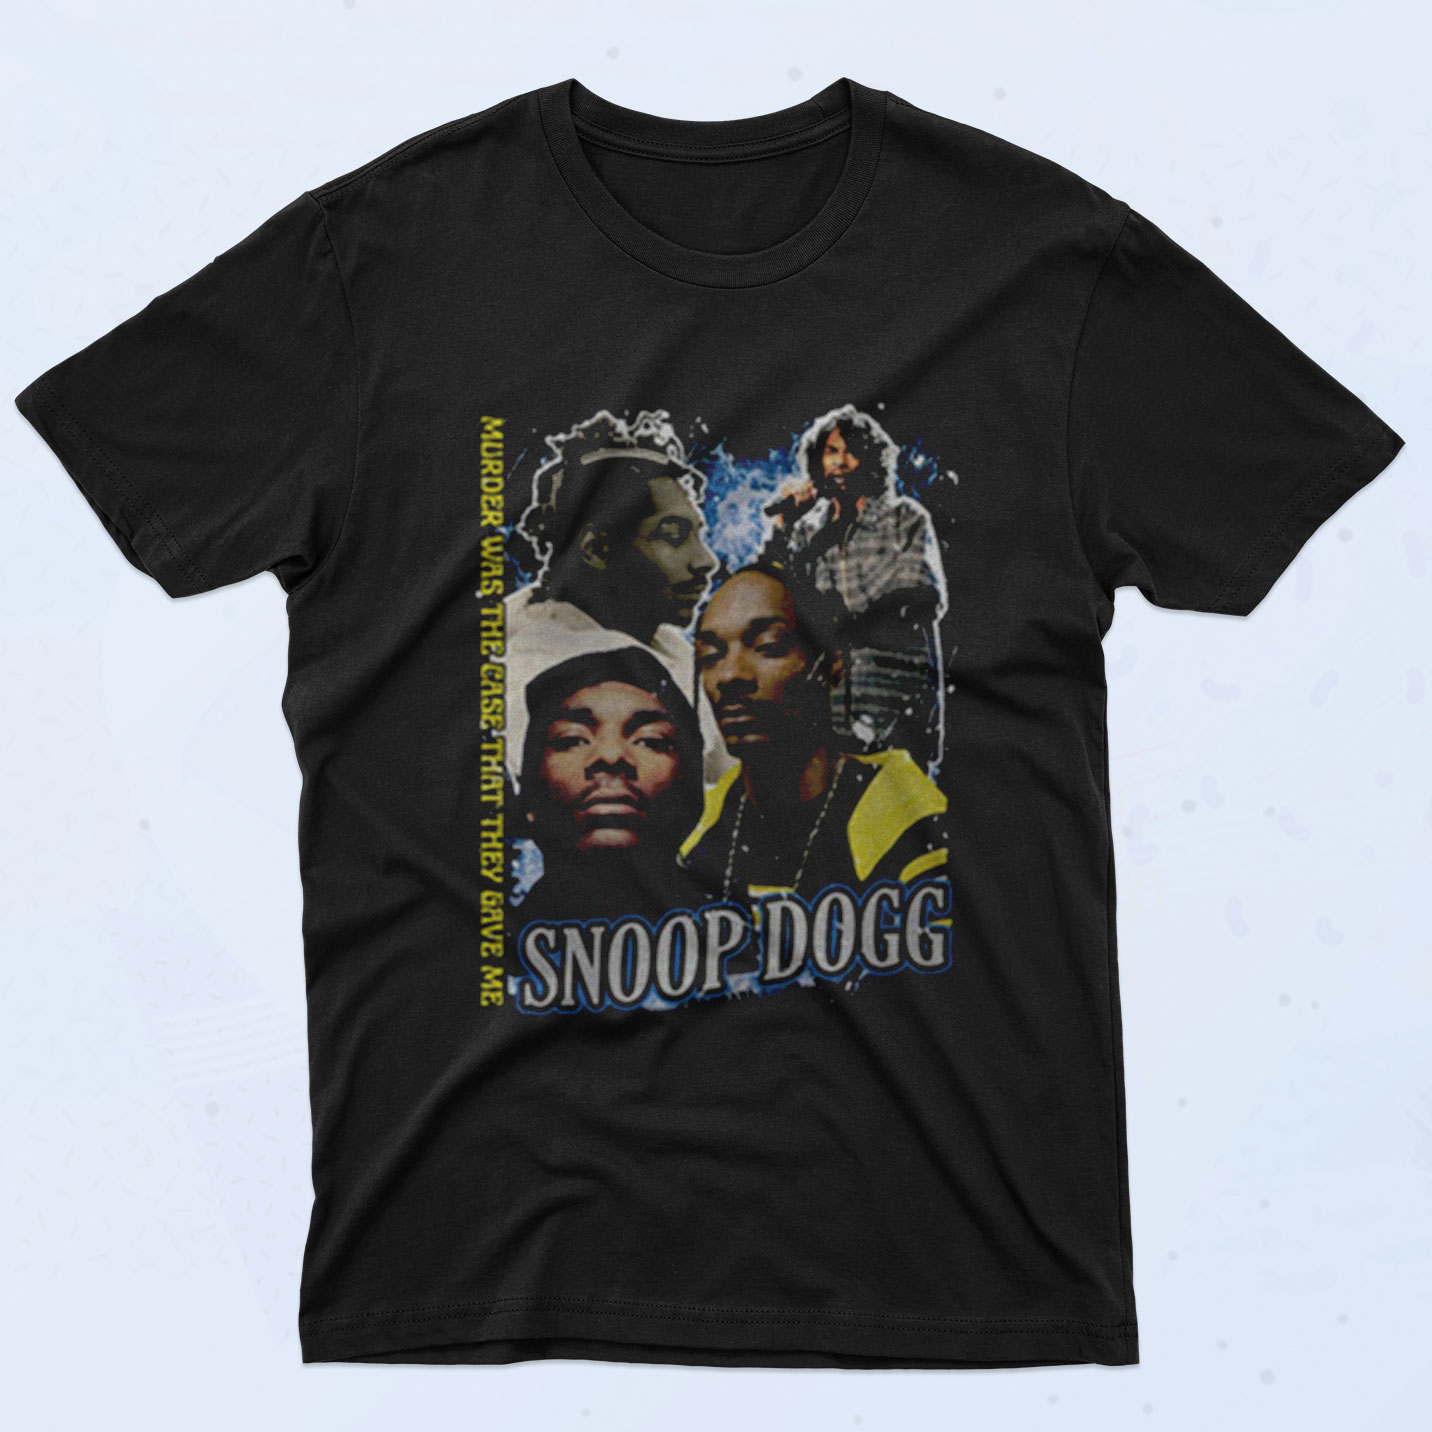 Snoop Dogg 90s Street Rapper 90s T Shirt Style - 90sclothes.com